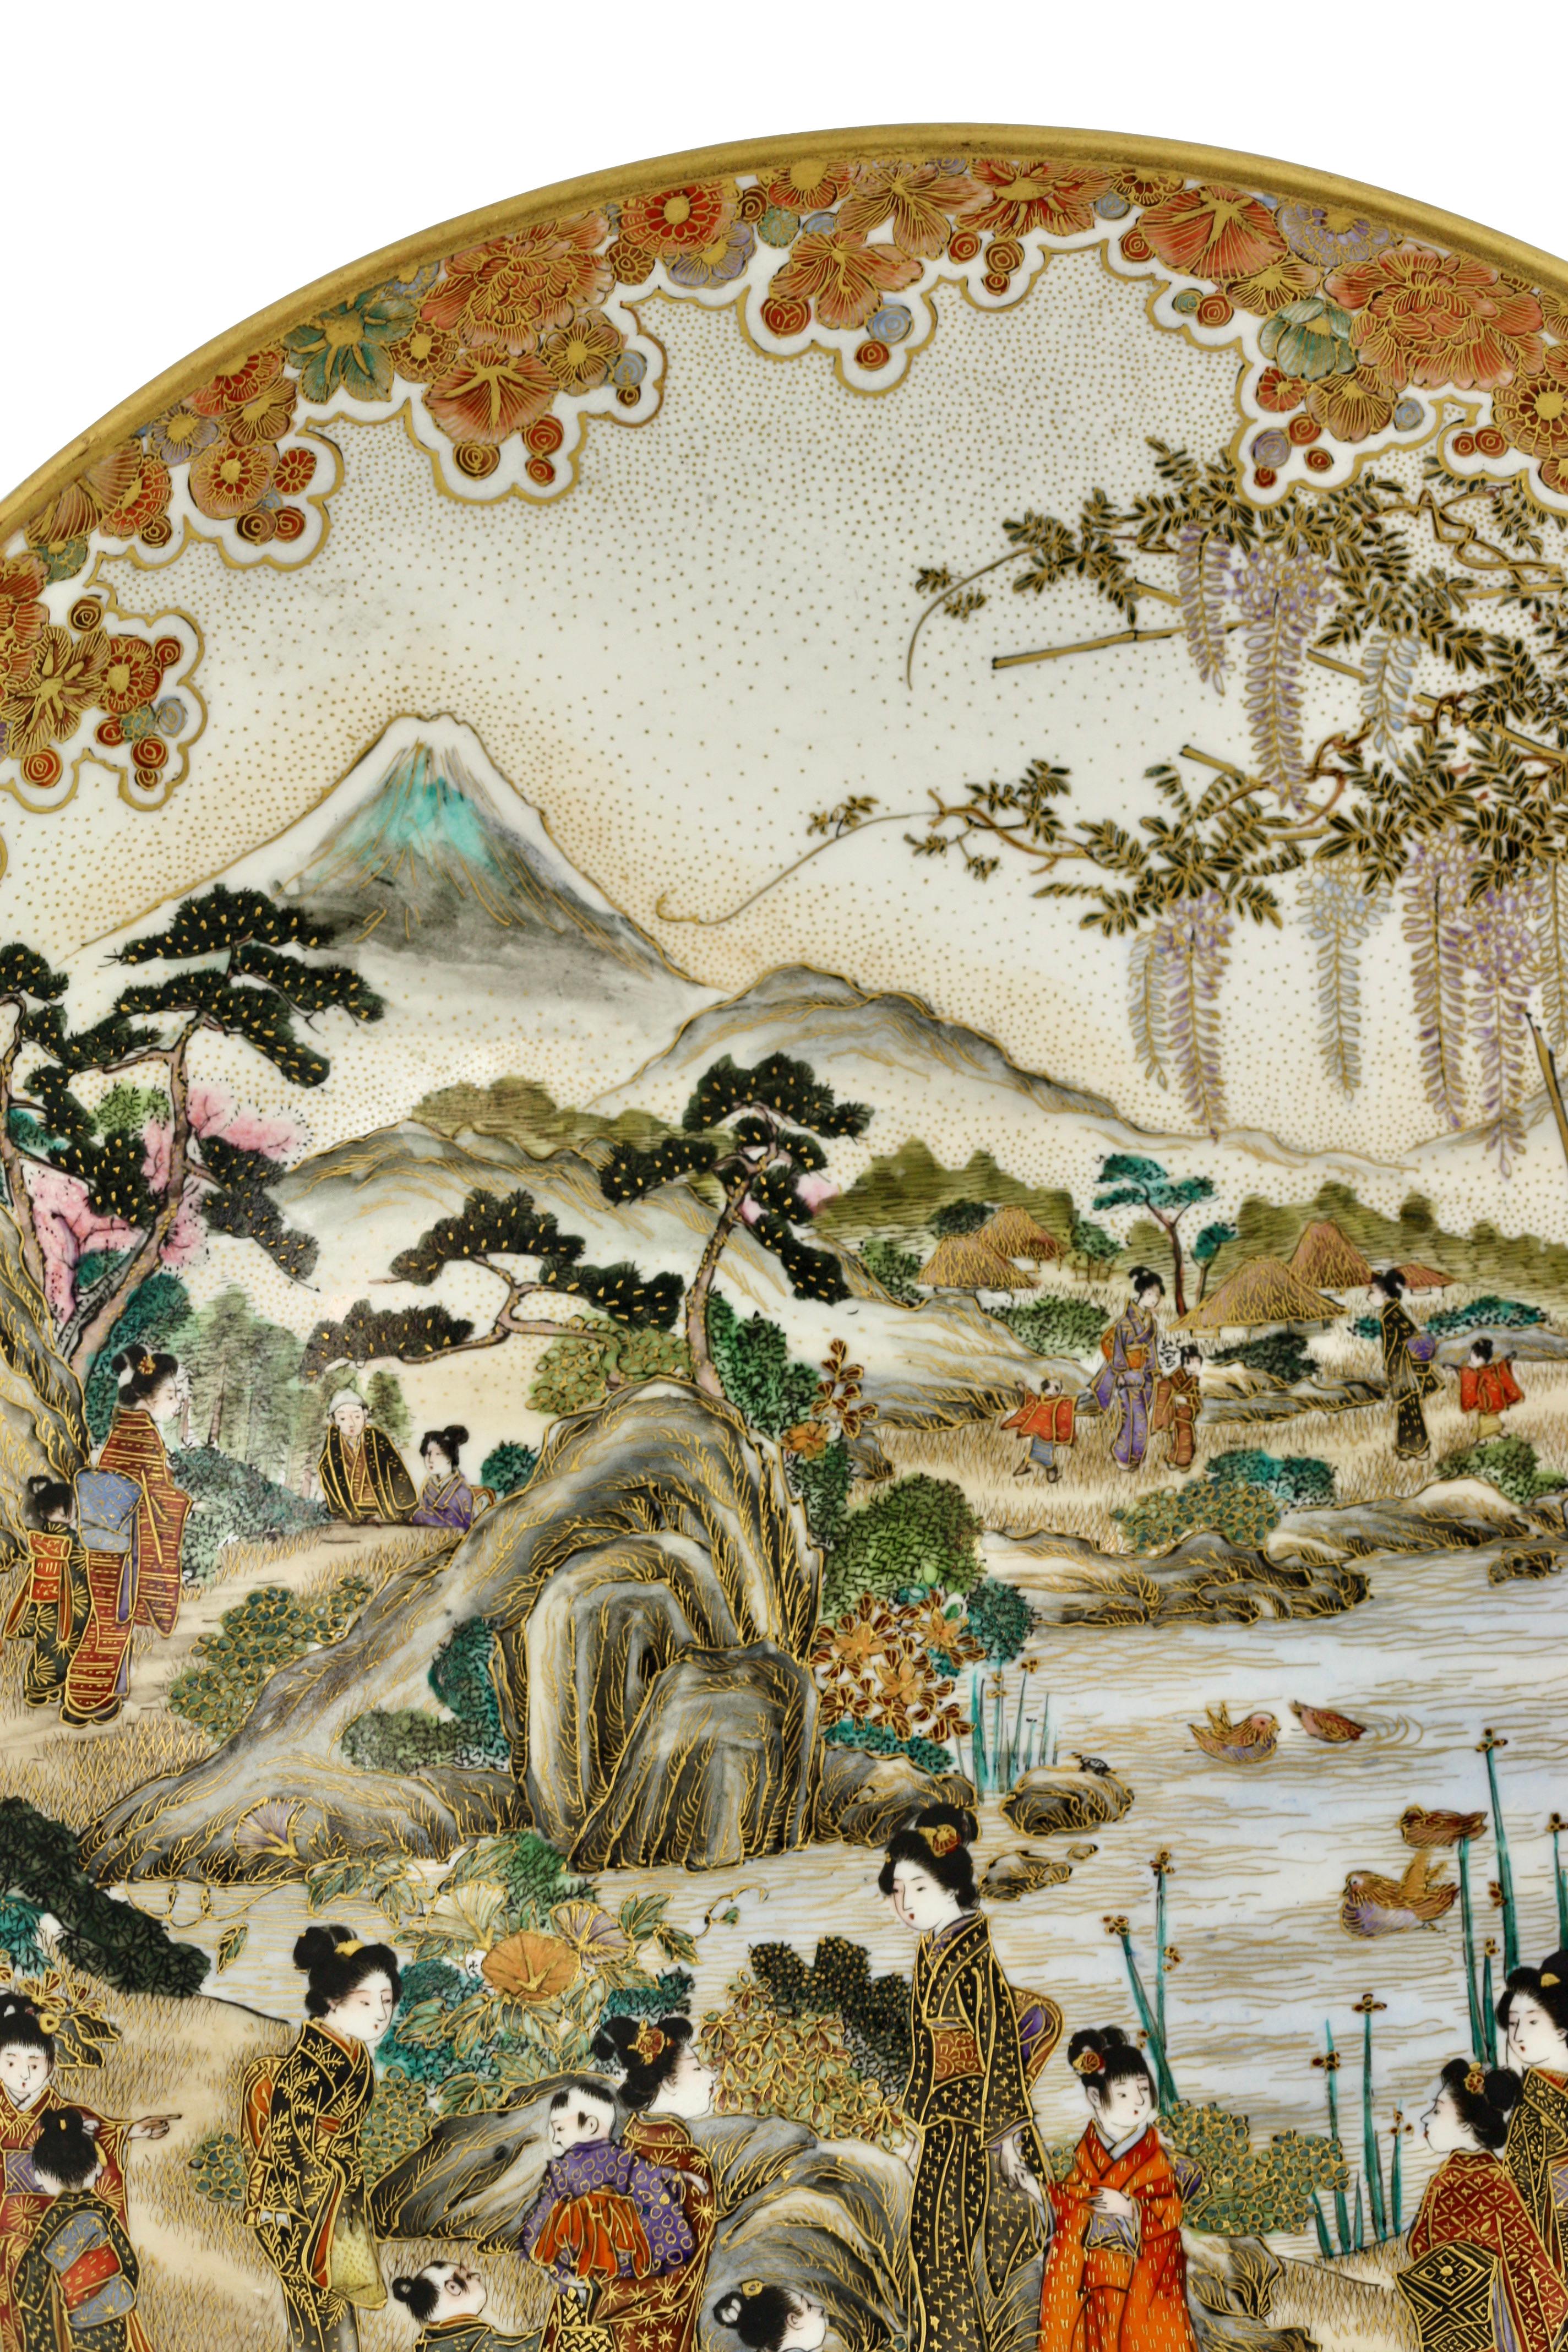 
An earthenware dish 
By Kinkozan, Meiji period, late 19th century
Painted in polychrome enamels and gilt over a clear crackled glaze with beauties and children enjoying a summer outing in a mountainous water landscape, the scene surrounded by a